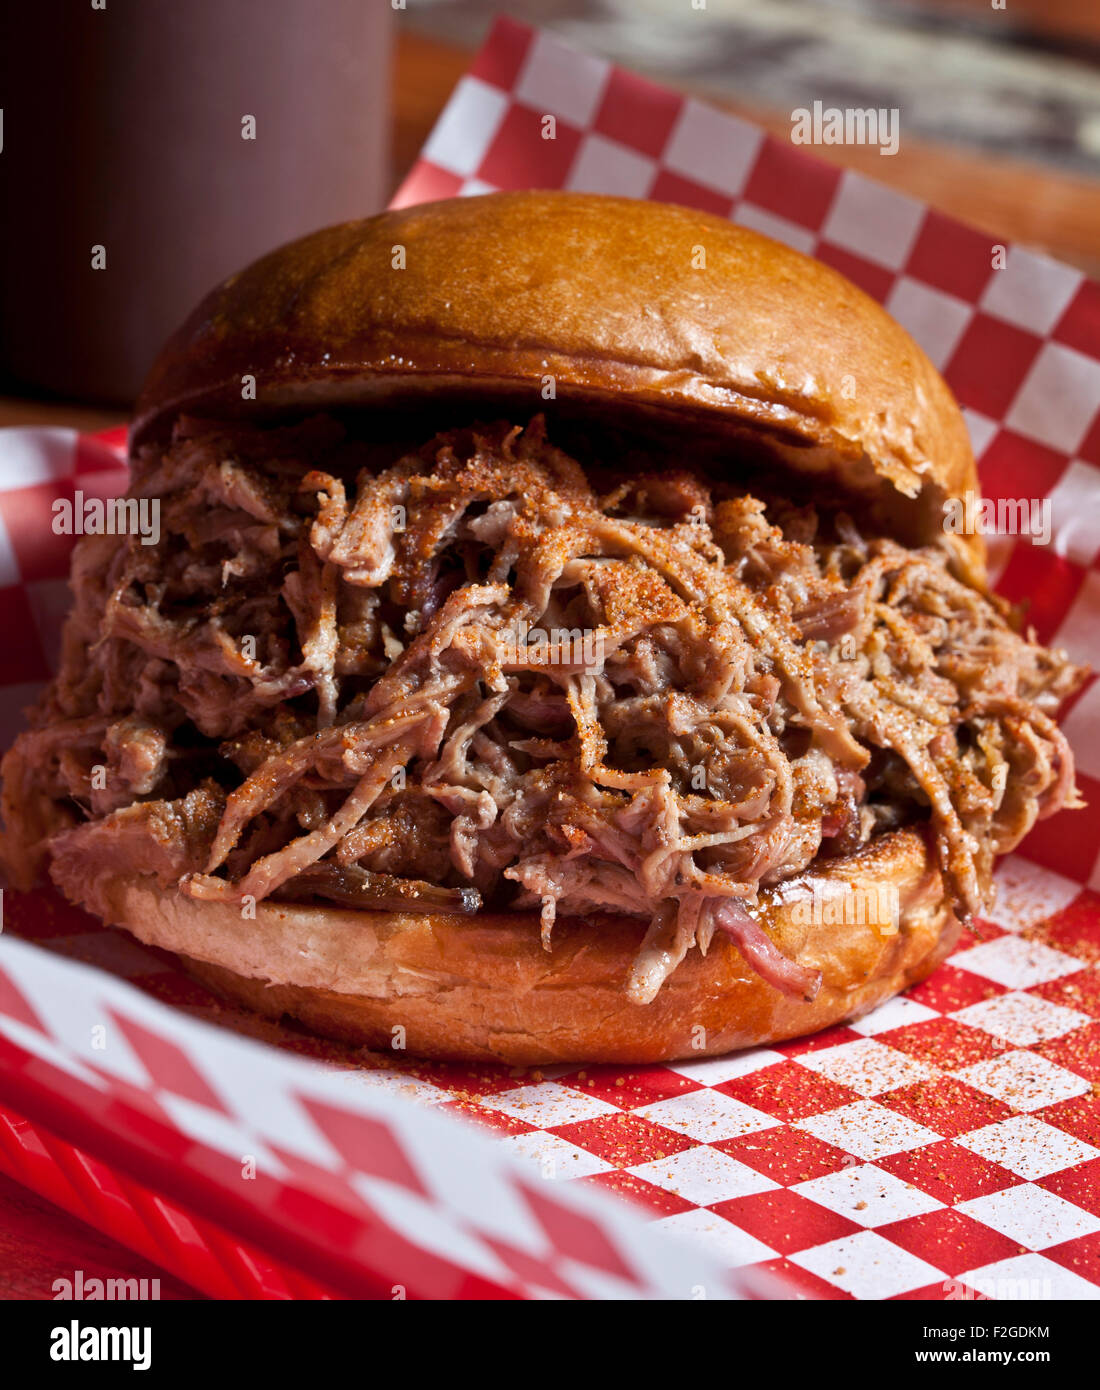 pulled-pork sandwich on a bun on red and white checked paper Stock Photo